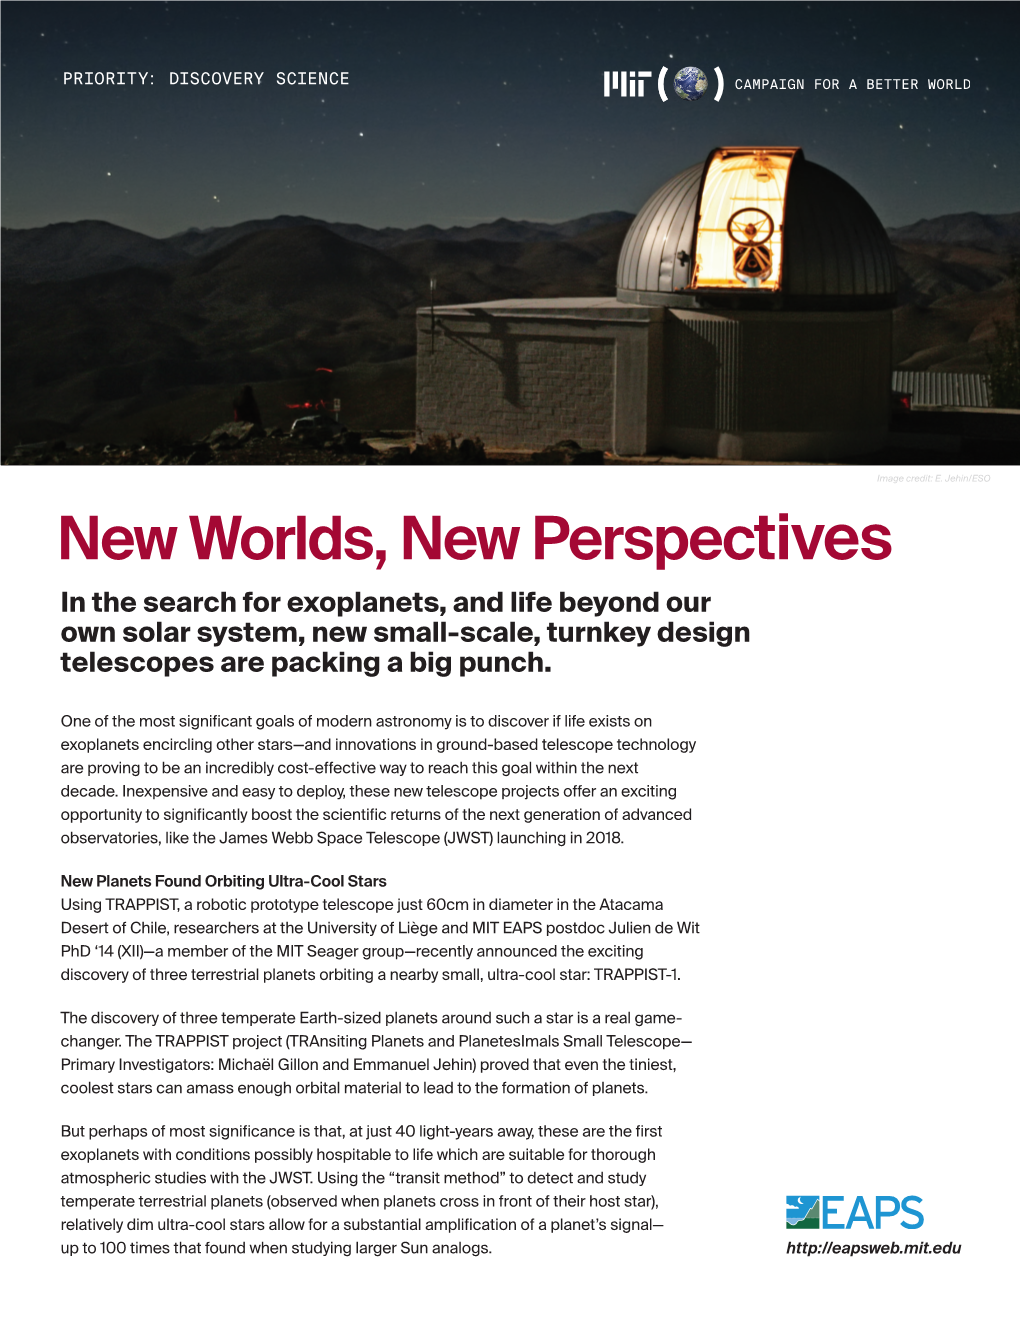 New Worlds, New Perspectives in the Search for Exoplanets, and Life Beyond Our Own Solar System, New Small-Scale, Turnkey Design Telescopes Are Packing a Big Punch